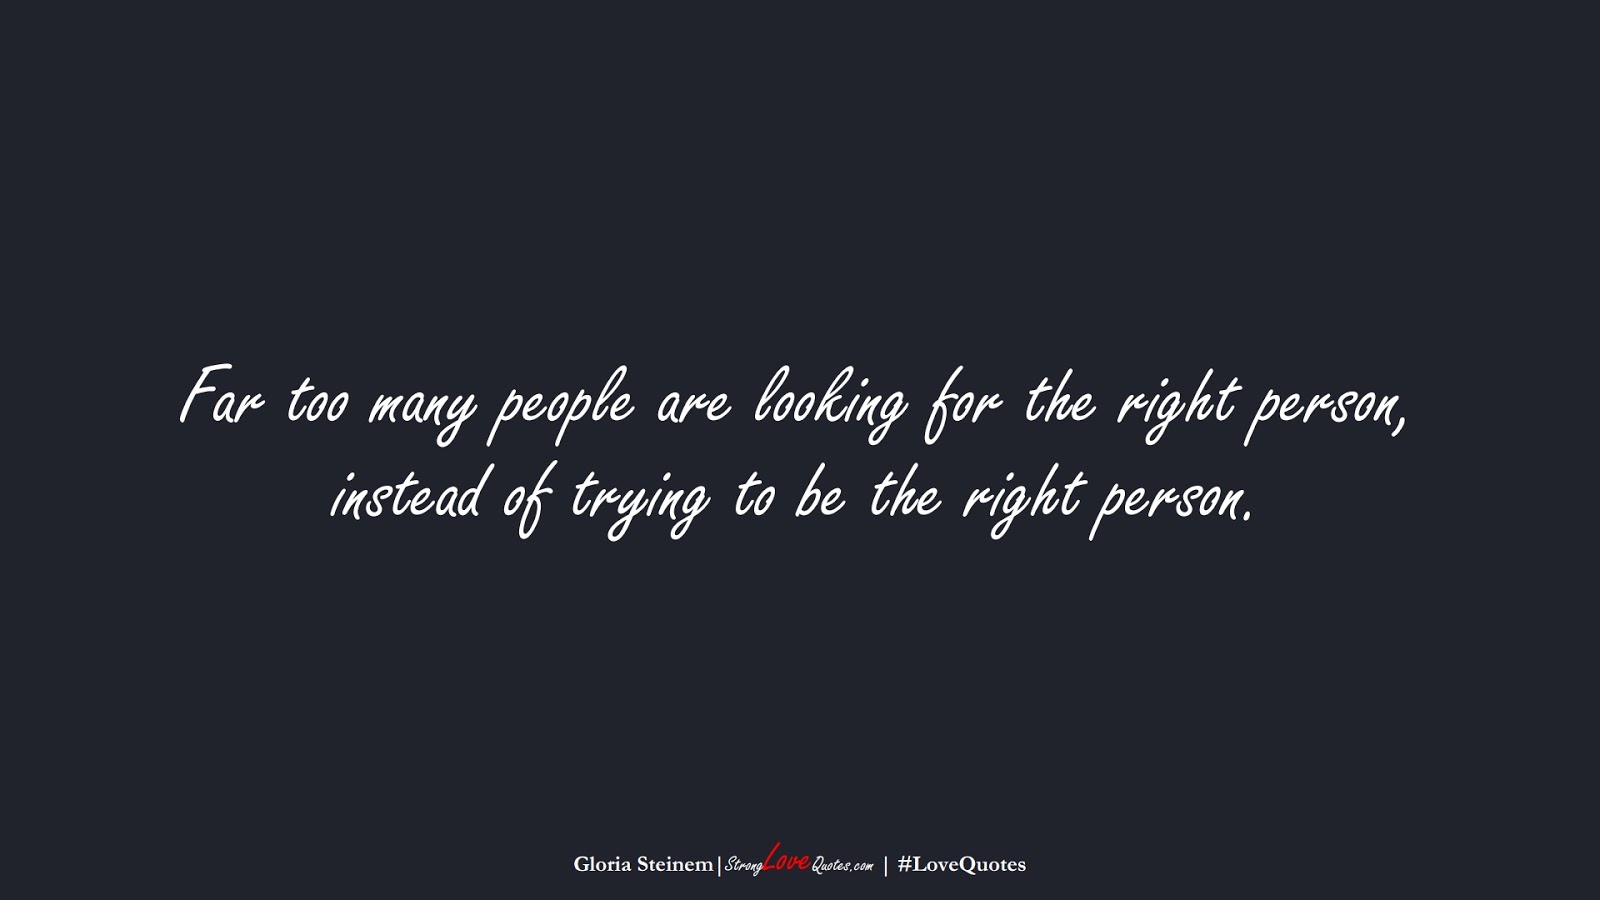 Far too many people are looking for the right person, instead of trying to be the right person. (Gloria Steinem);  #LoveQuotes